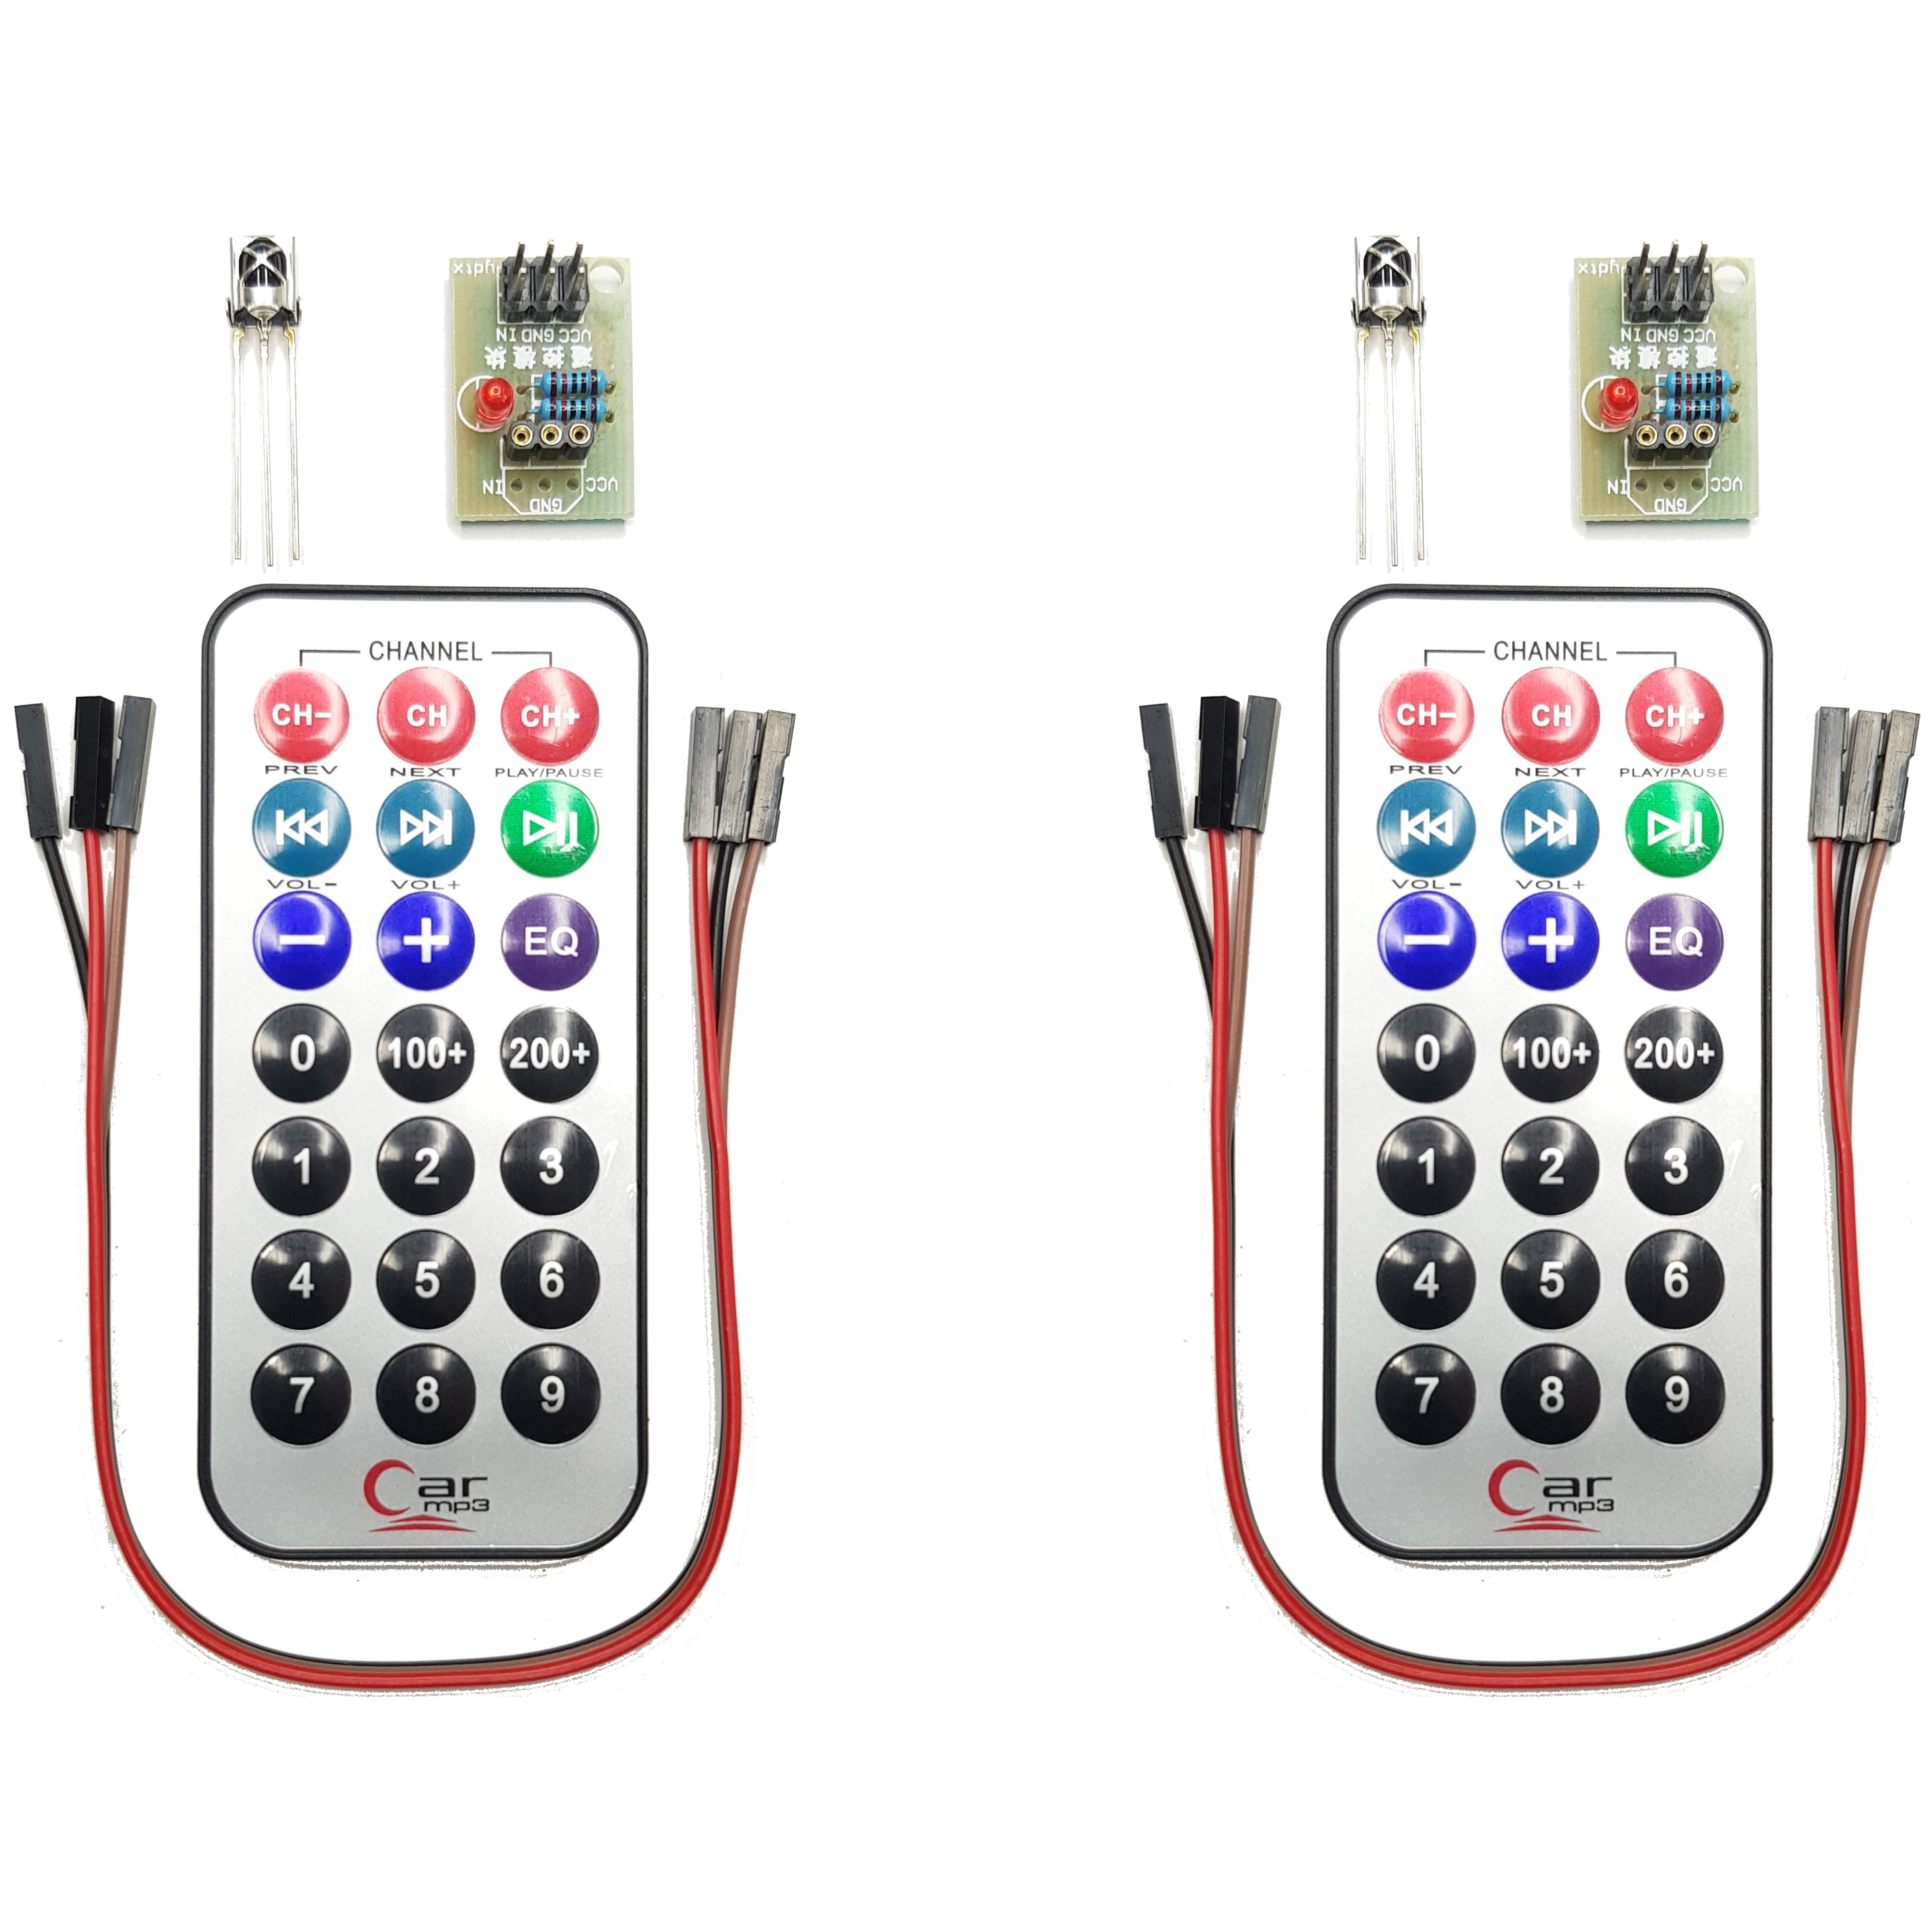 Infrared IR Remote Control Kit with 21-key Controller and Receiver